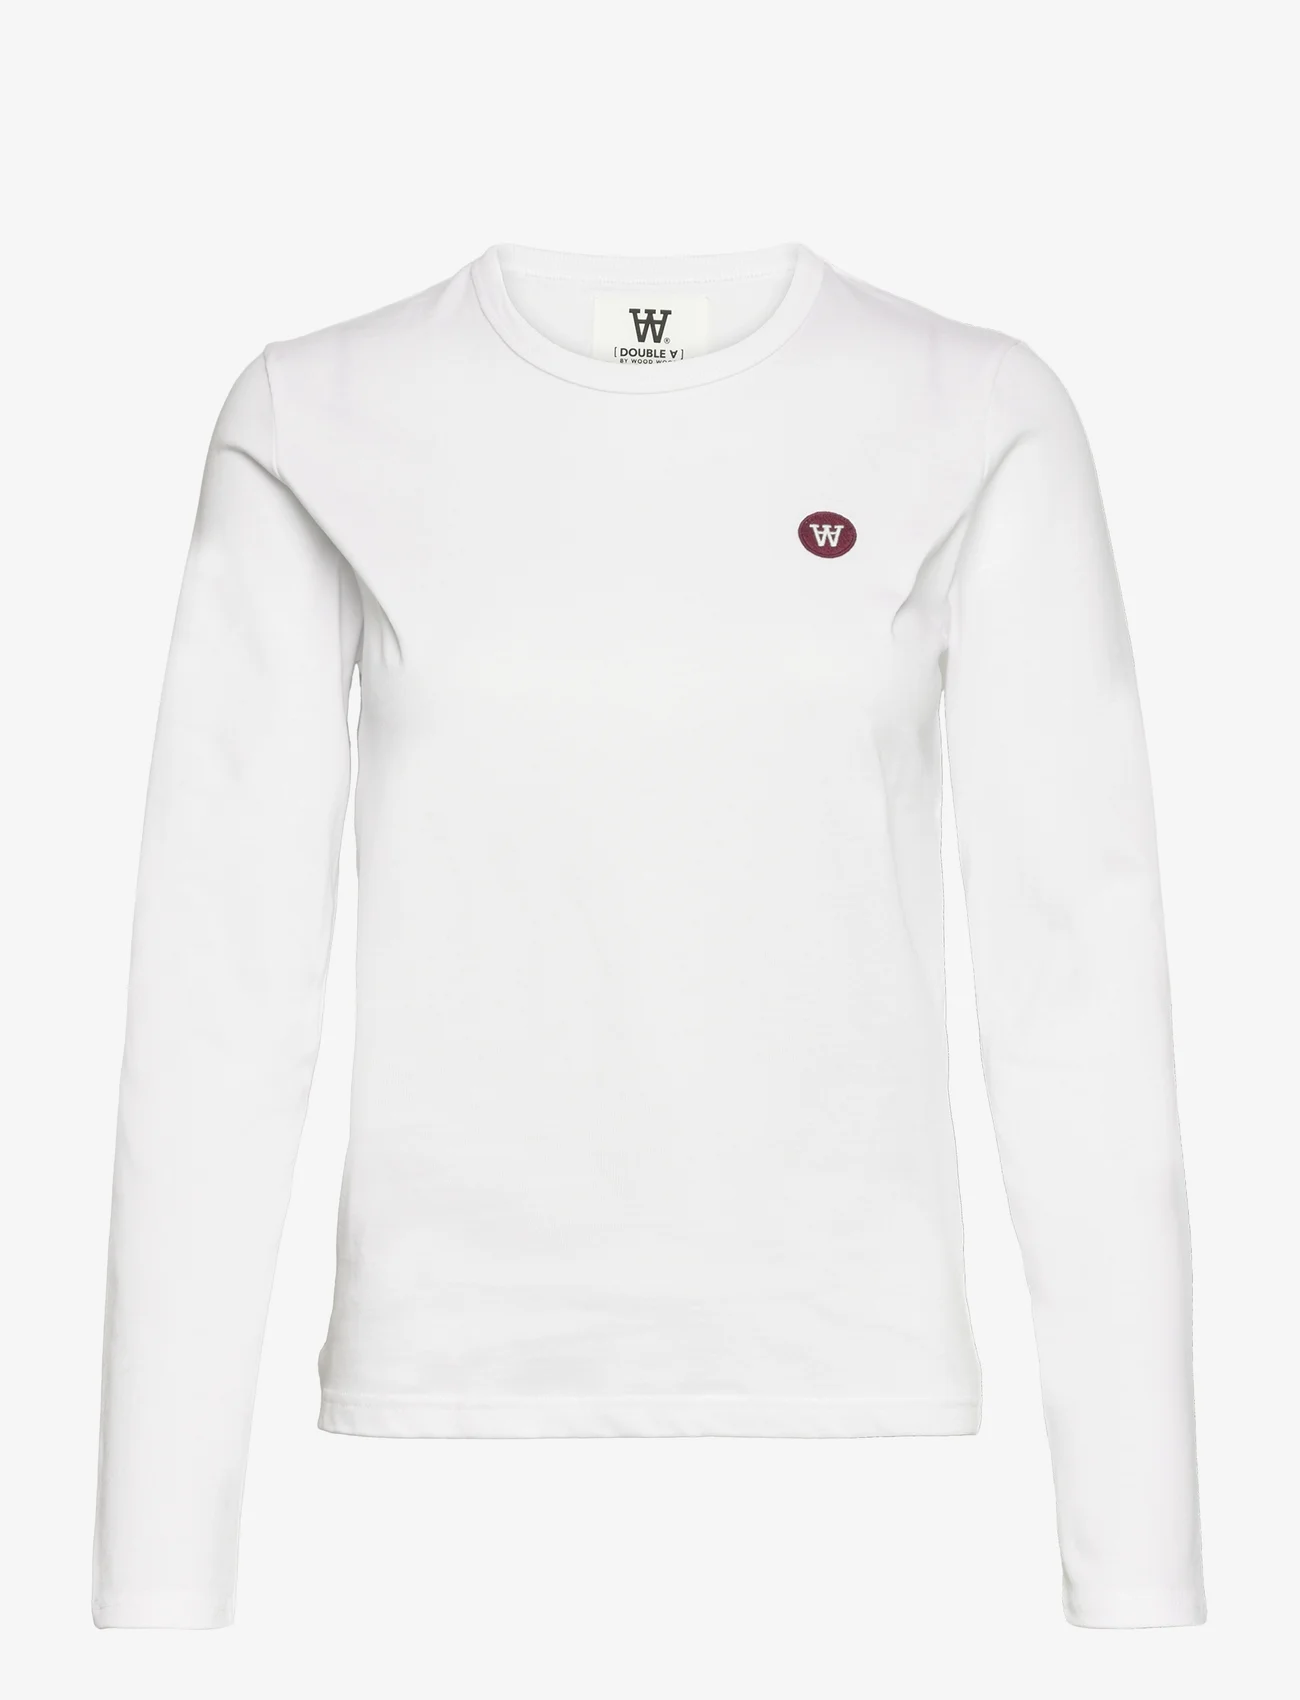 Double A by Wood Wood - Moa longsleeve - t-shirt & tops - white - 0